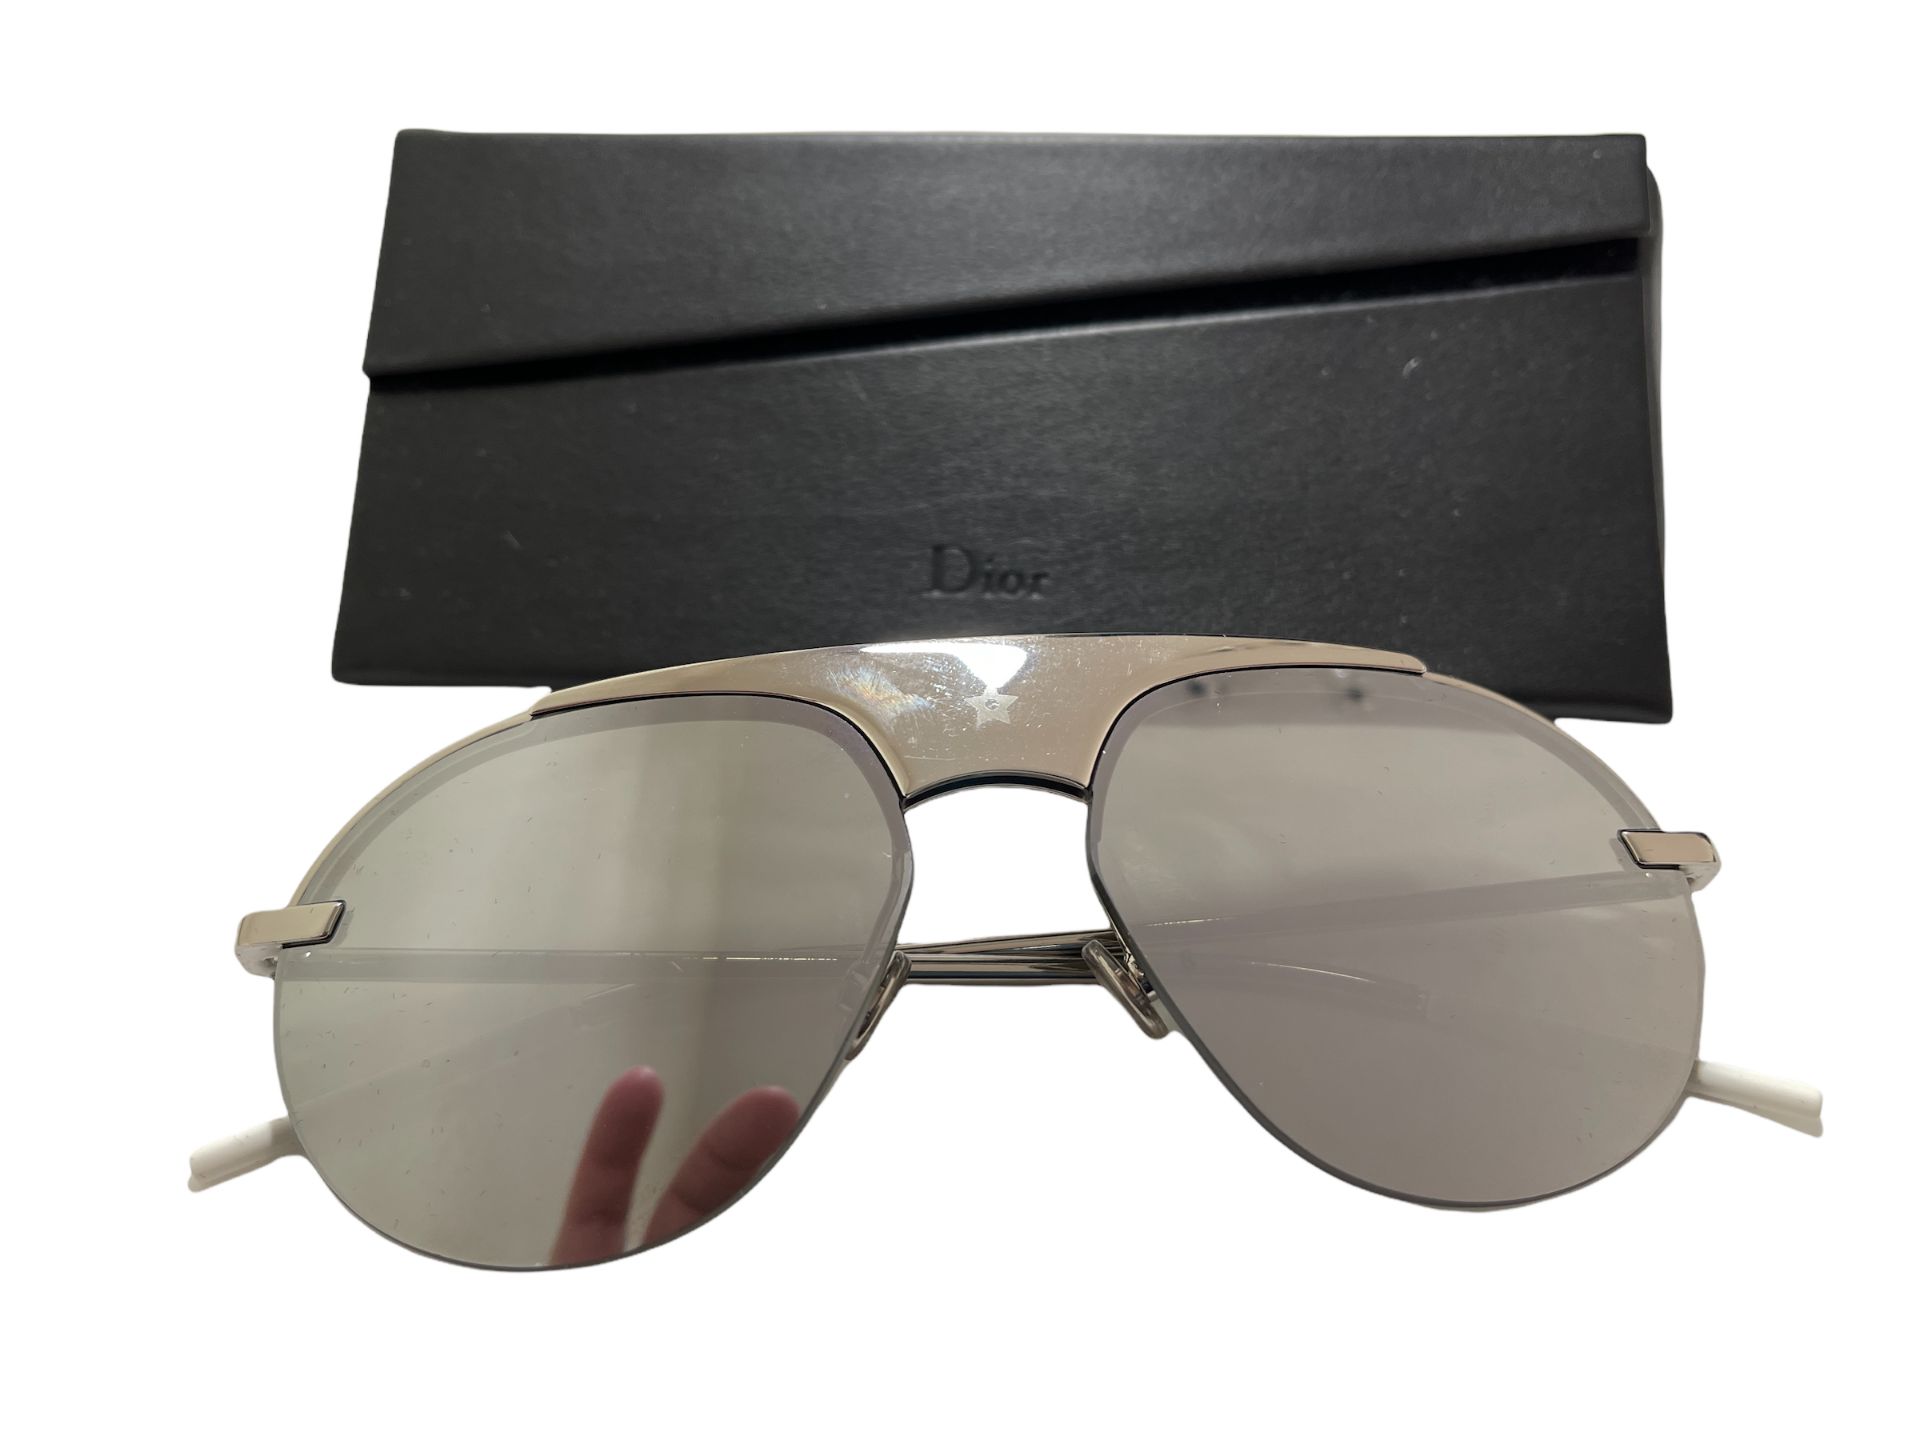 Dior Revolution Sunglasses 0100T Palladium/White 99mm - Surplus Stock from Our Private Jet Charter.. - Image 11 of 11